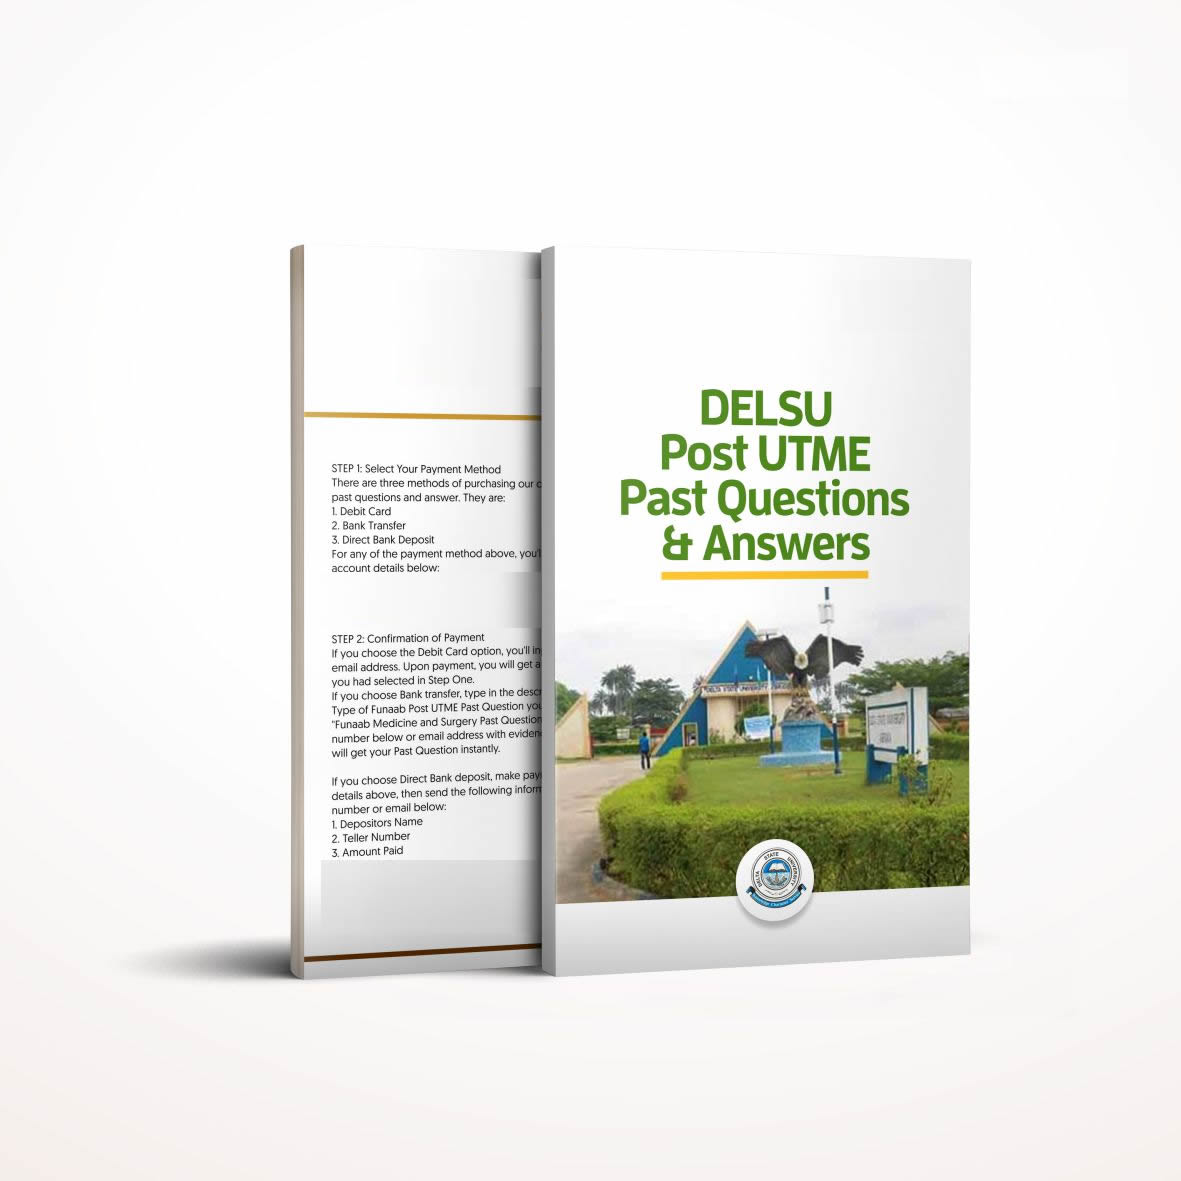 DELSU post utme past questions and answers